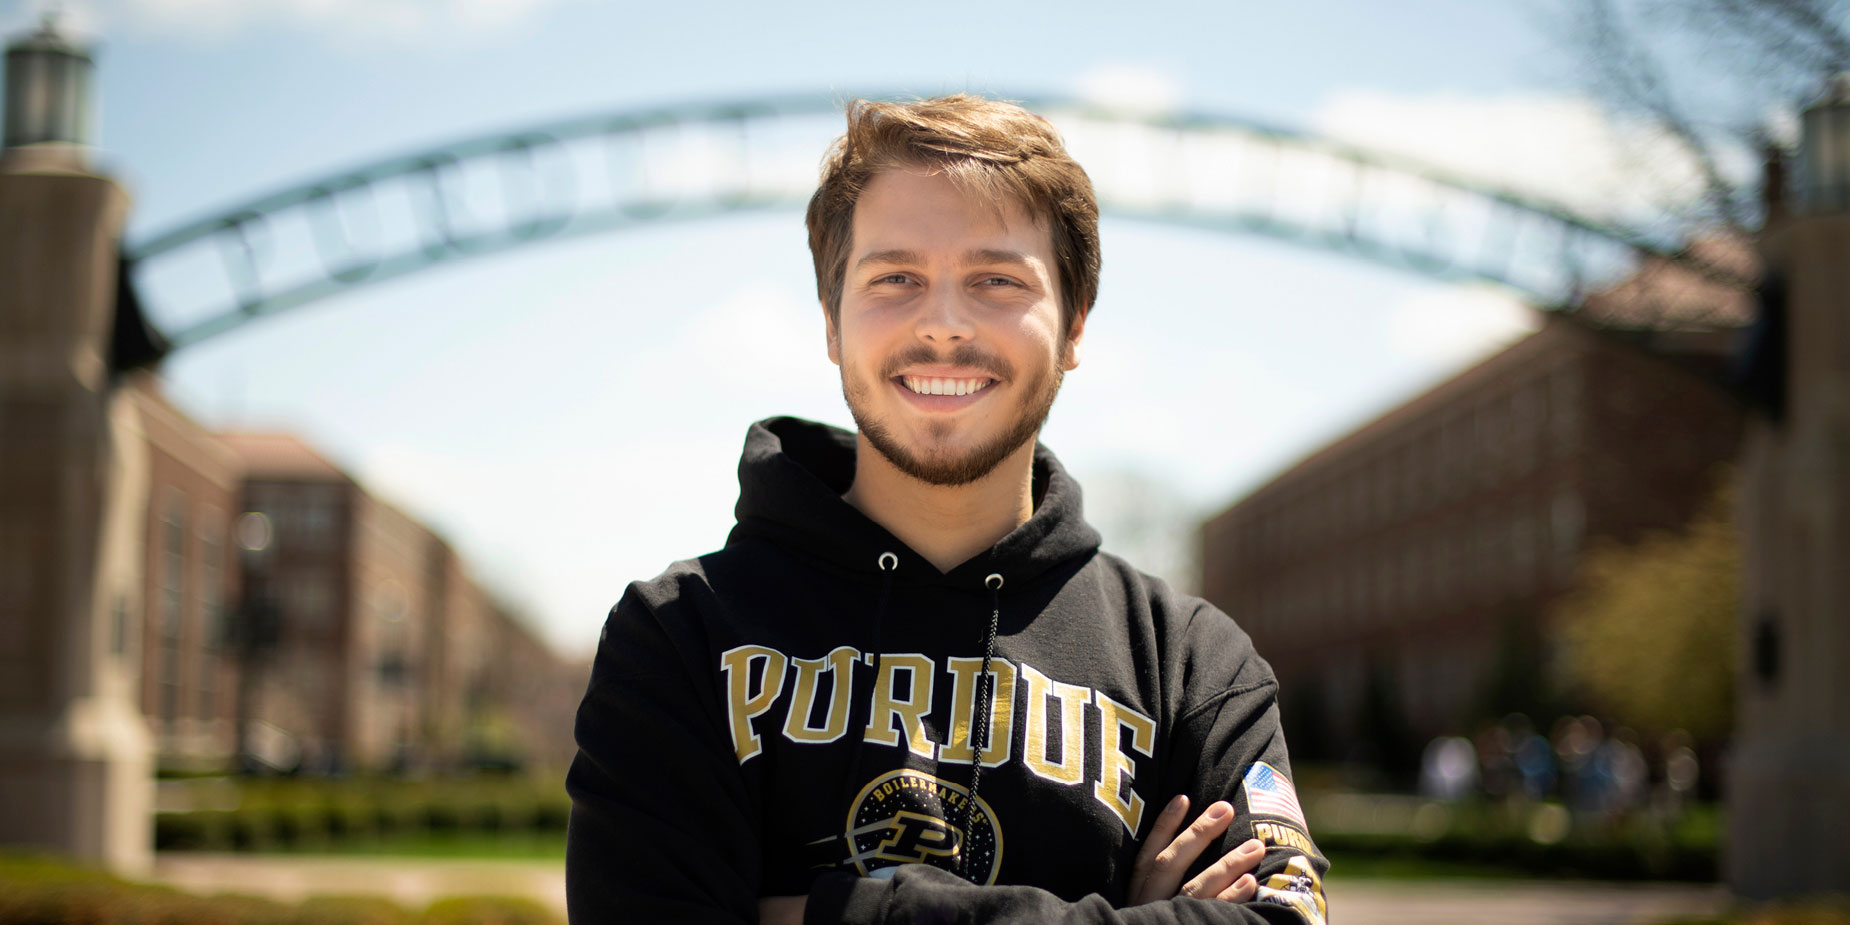 Logan Noster poses at the ‘Gateway to the Future’ arch on the Purdue campus.